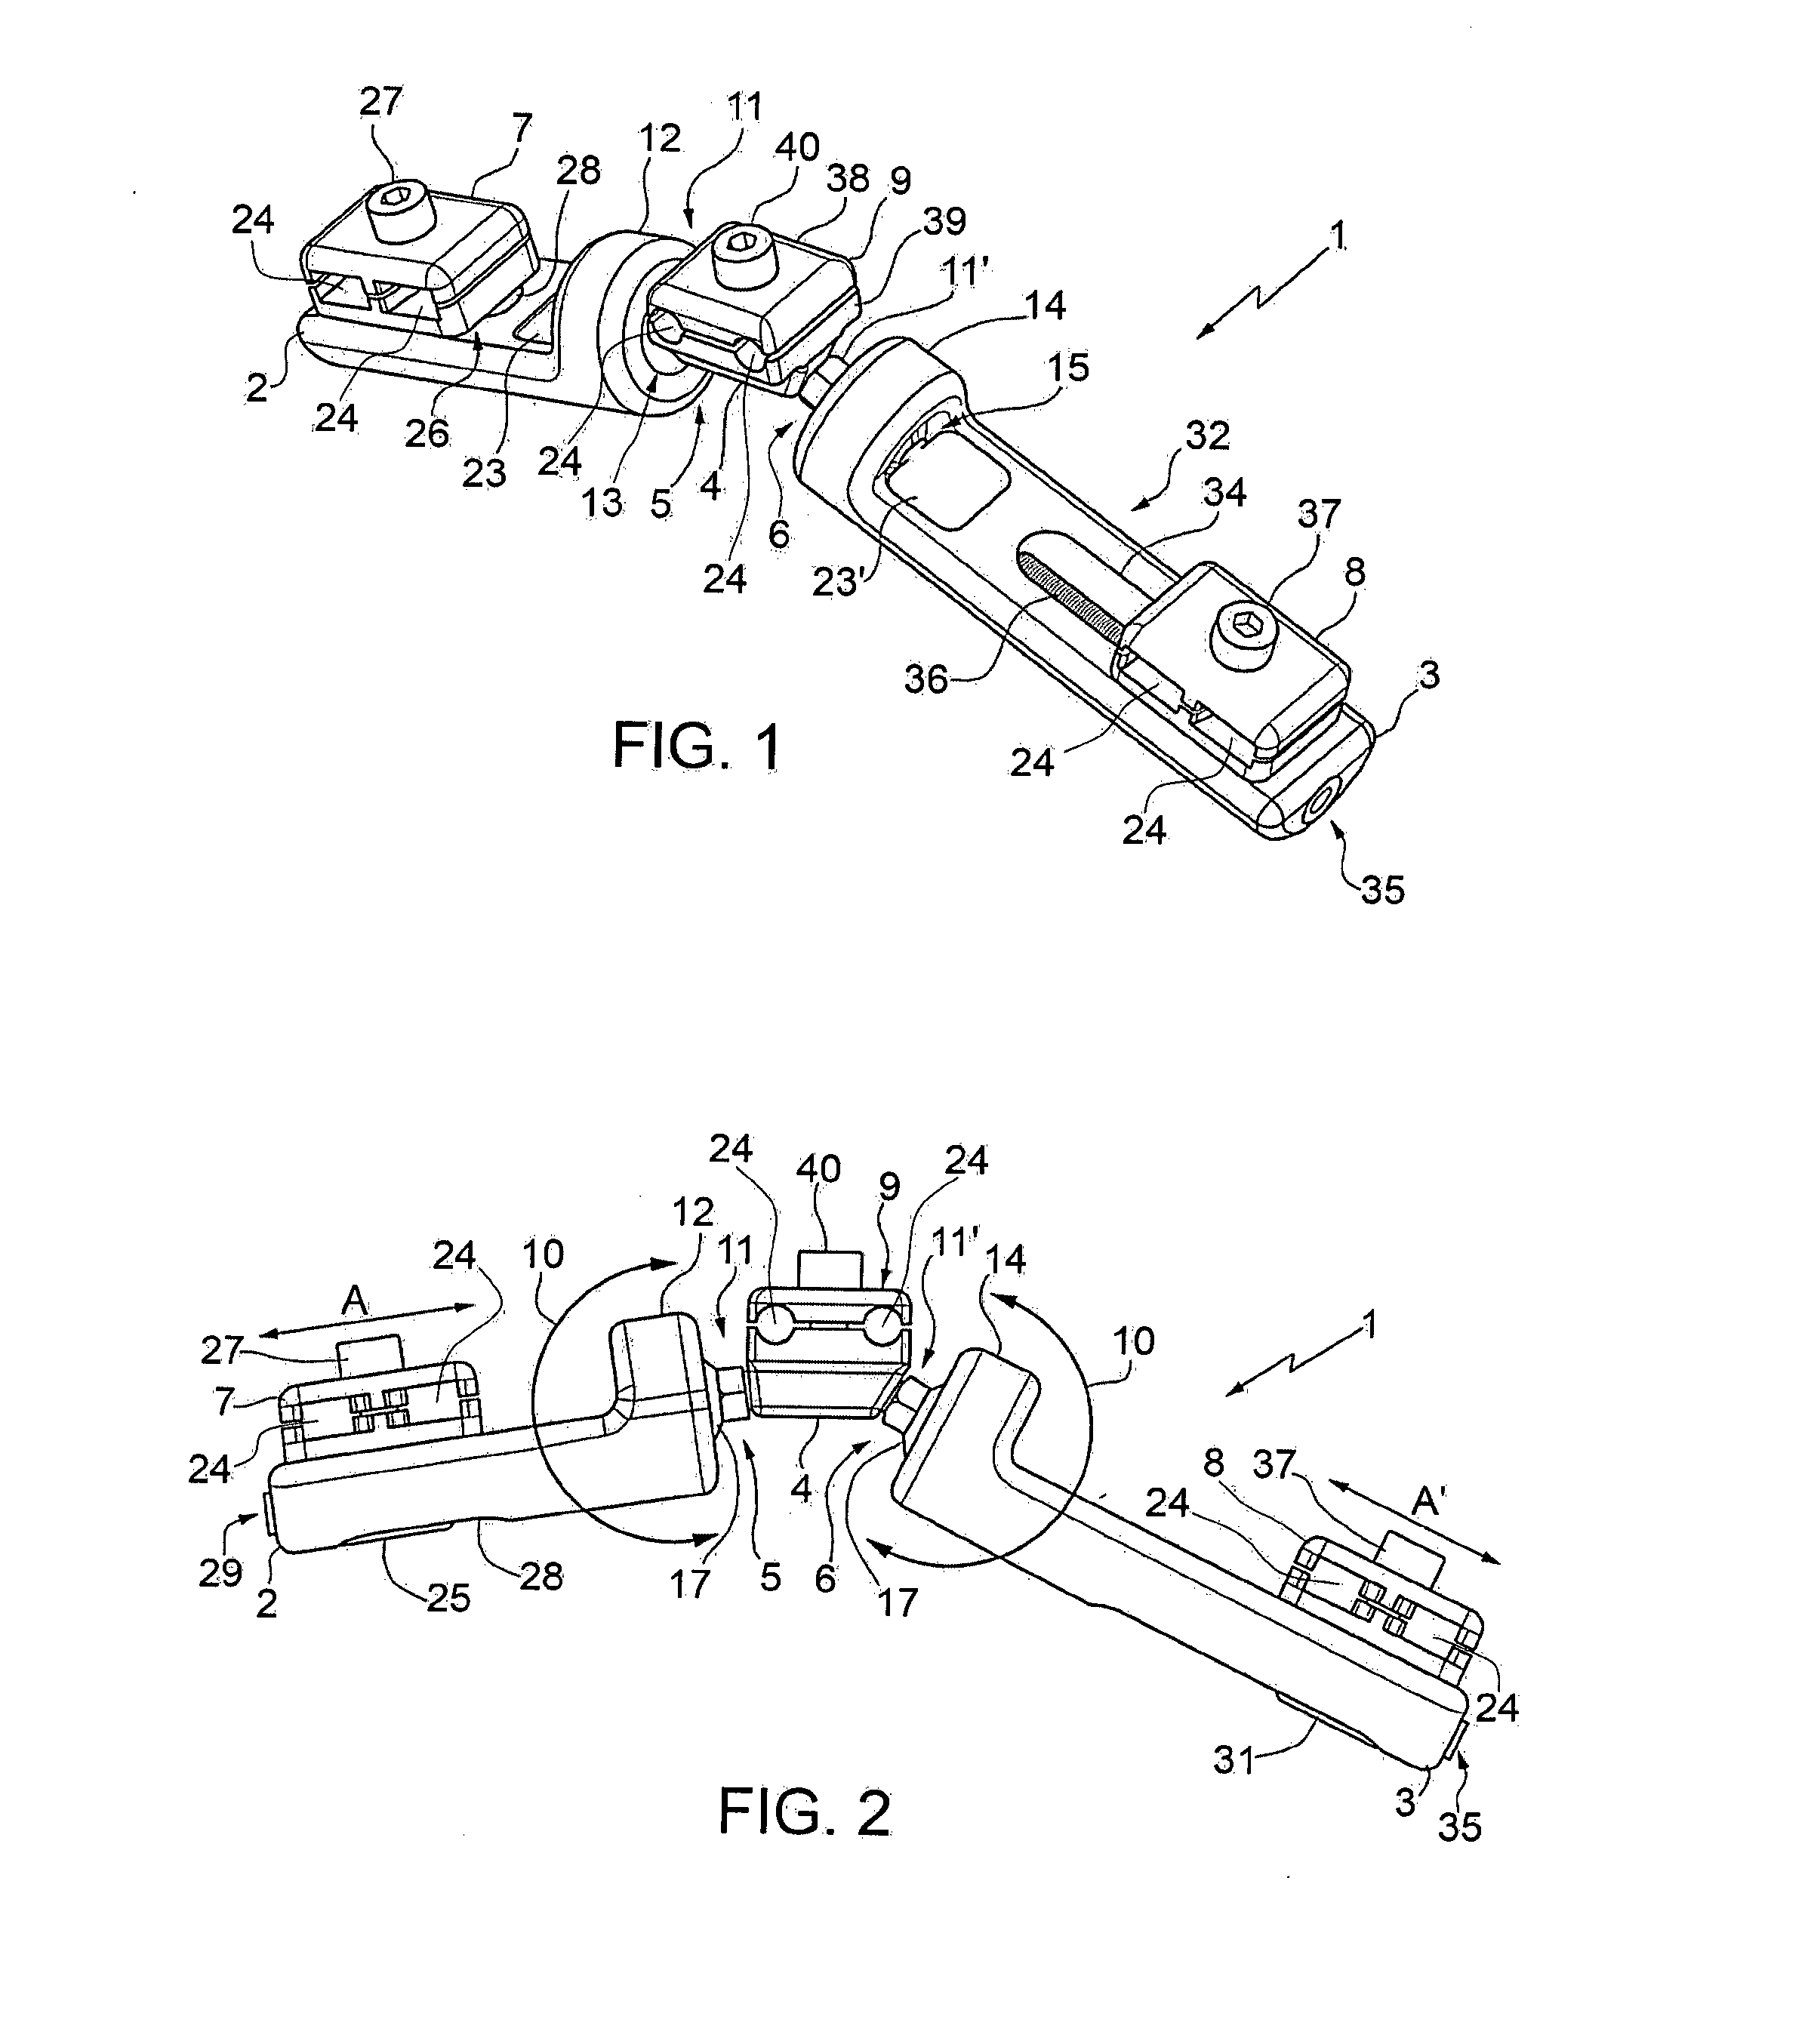 External fixing device, for treating bone fractures